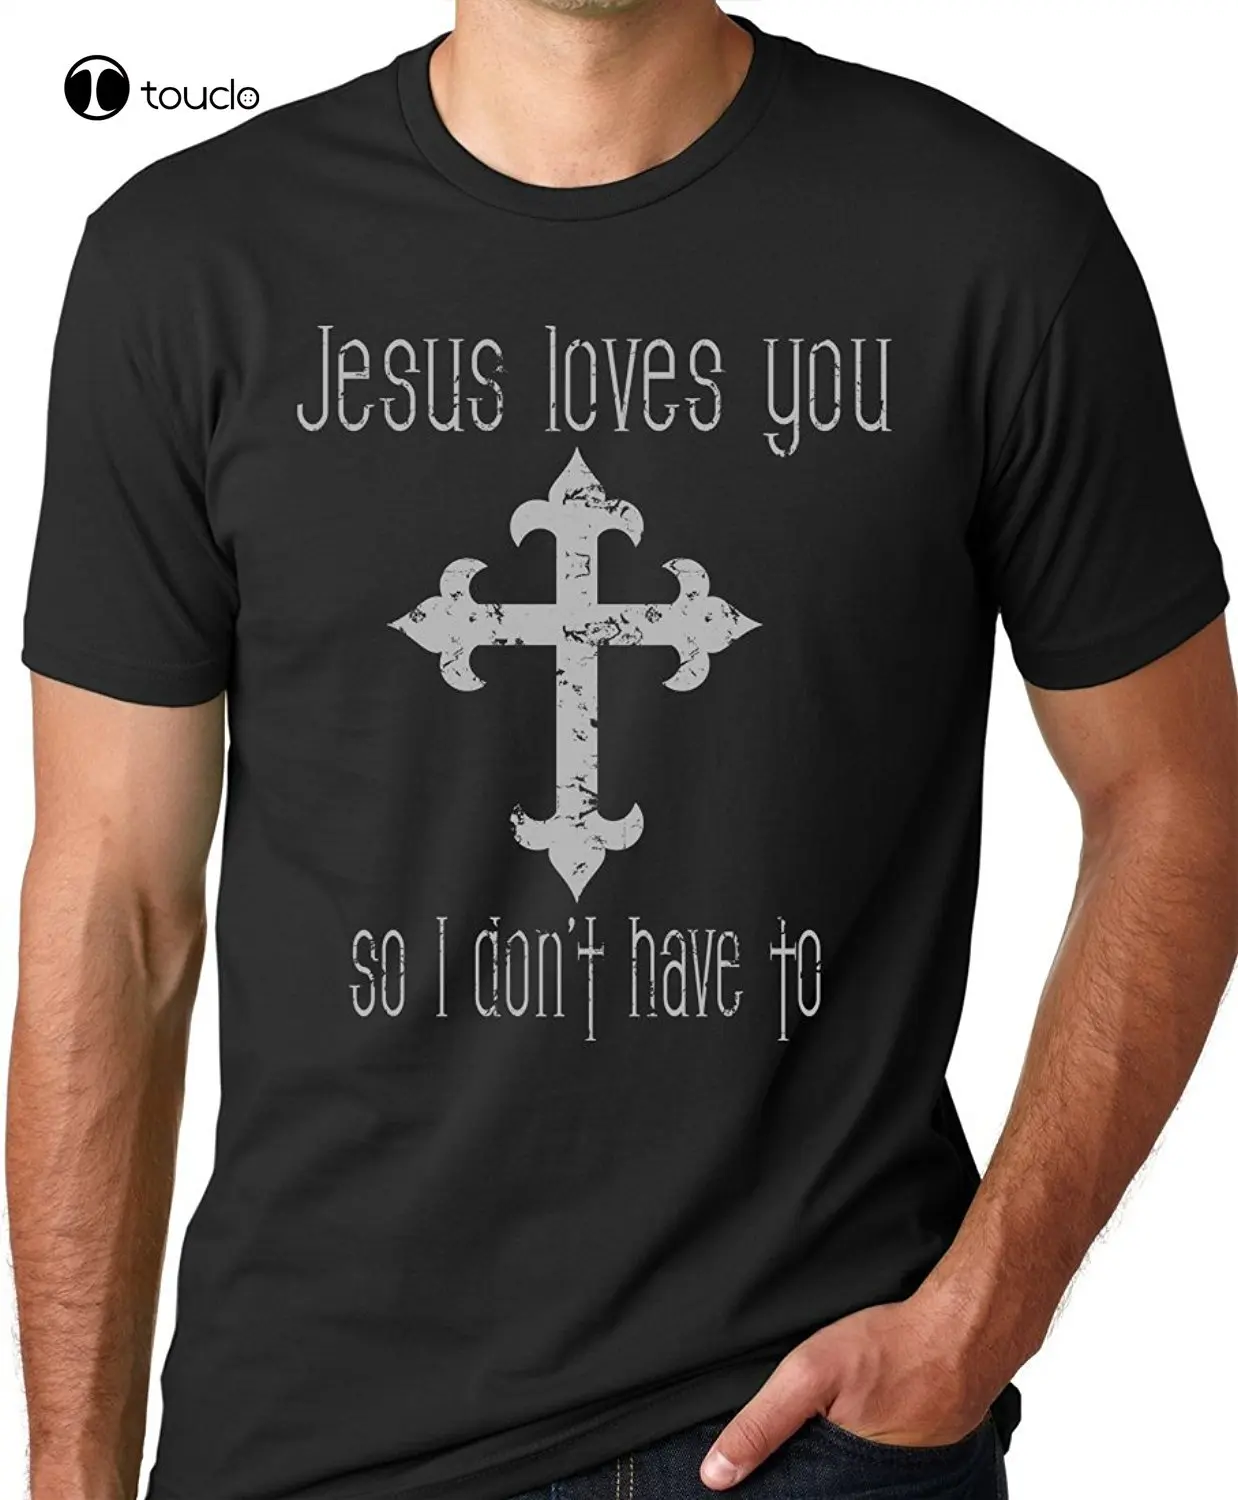 

New Summer Cool Tee Shirt Jesus Loves You So I Don'T Have To Funny T-Shirt Atheist Tee Cotton T-Shirt Custom Aldult Teen Unisex